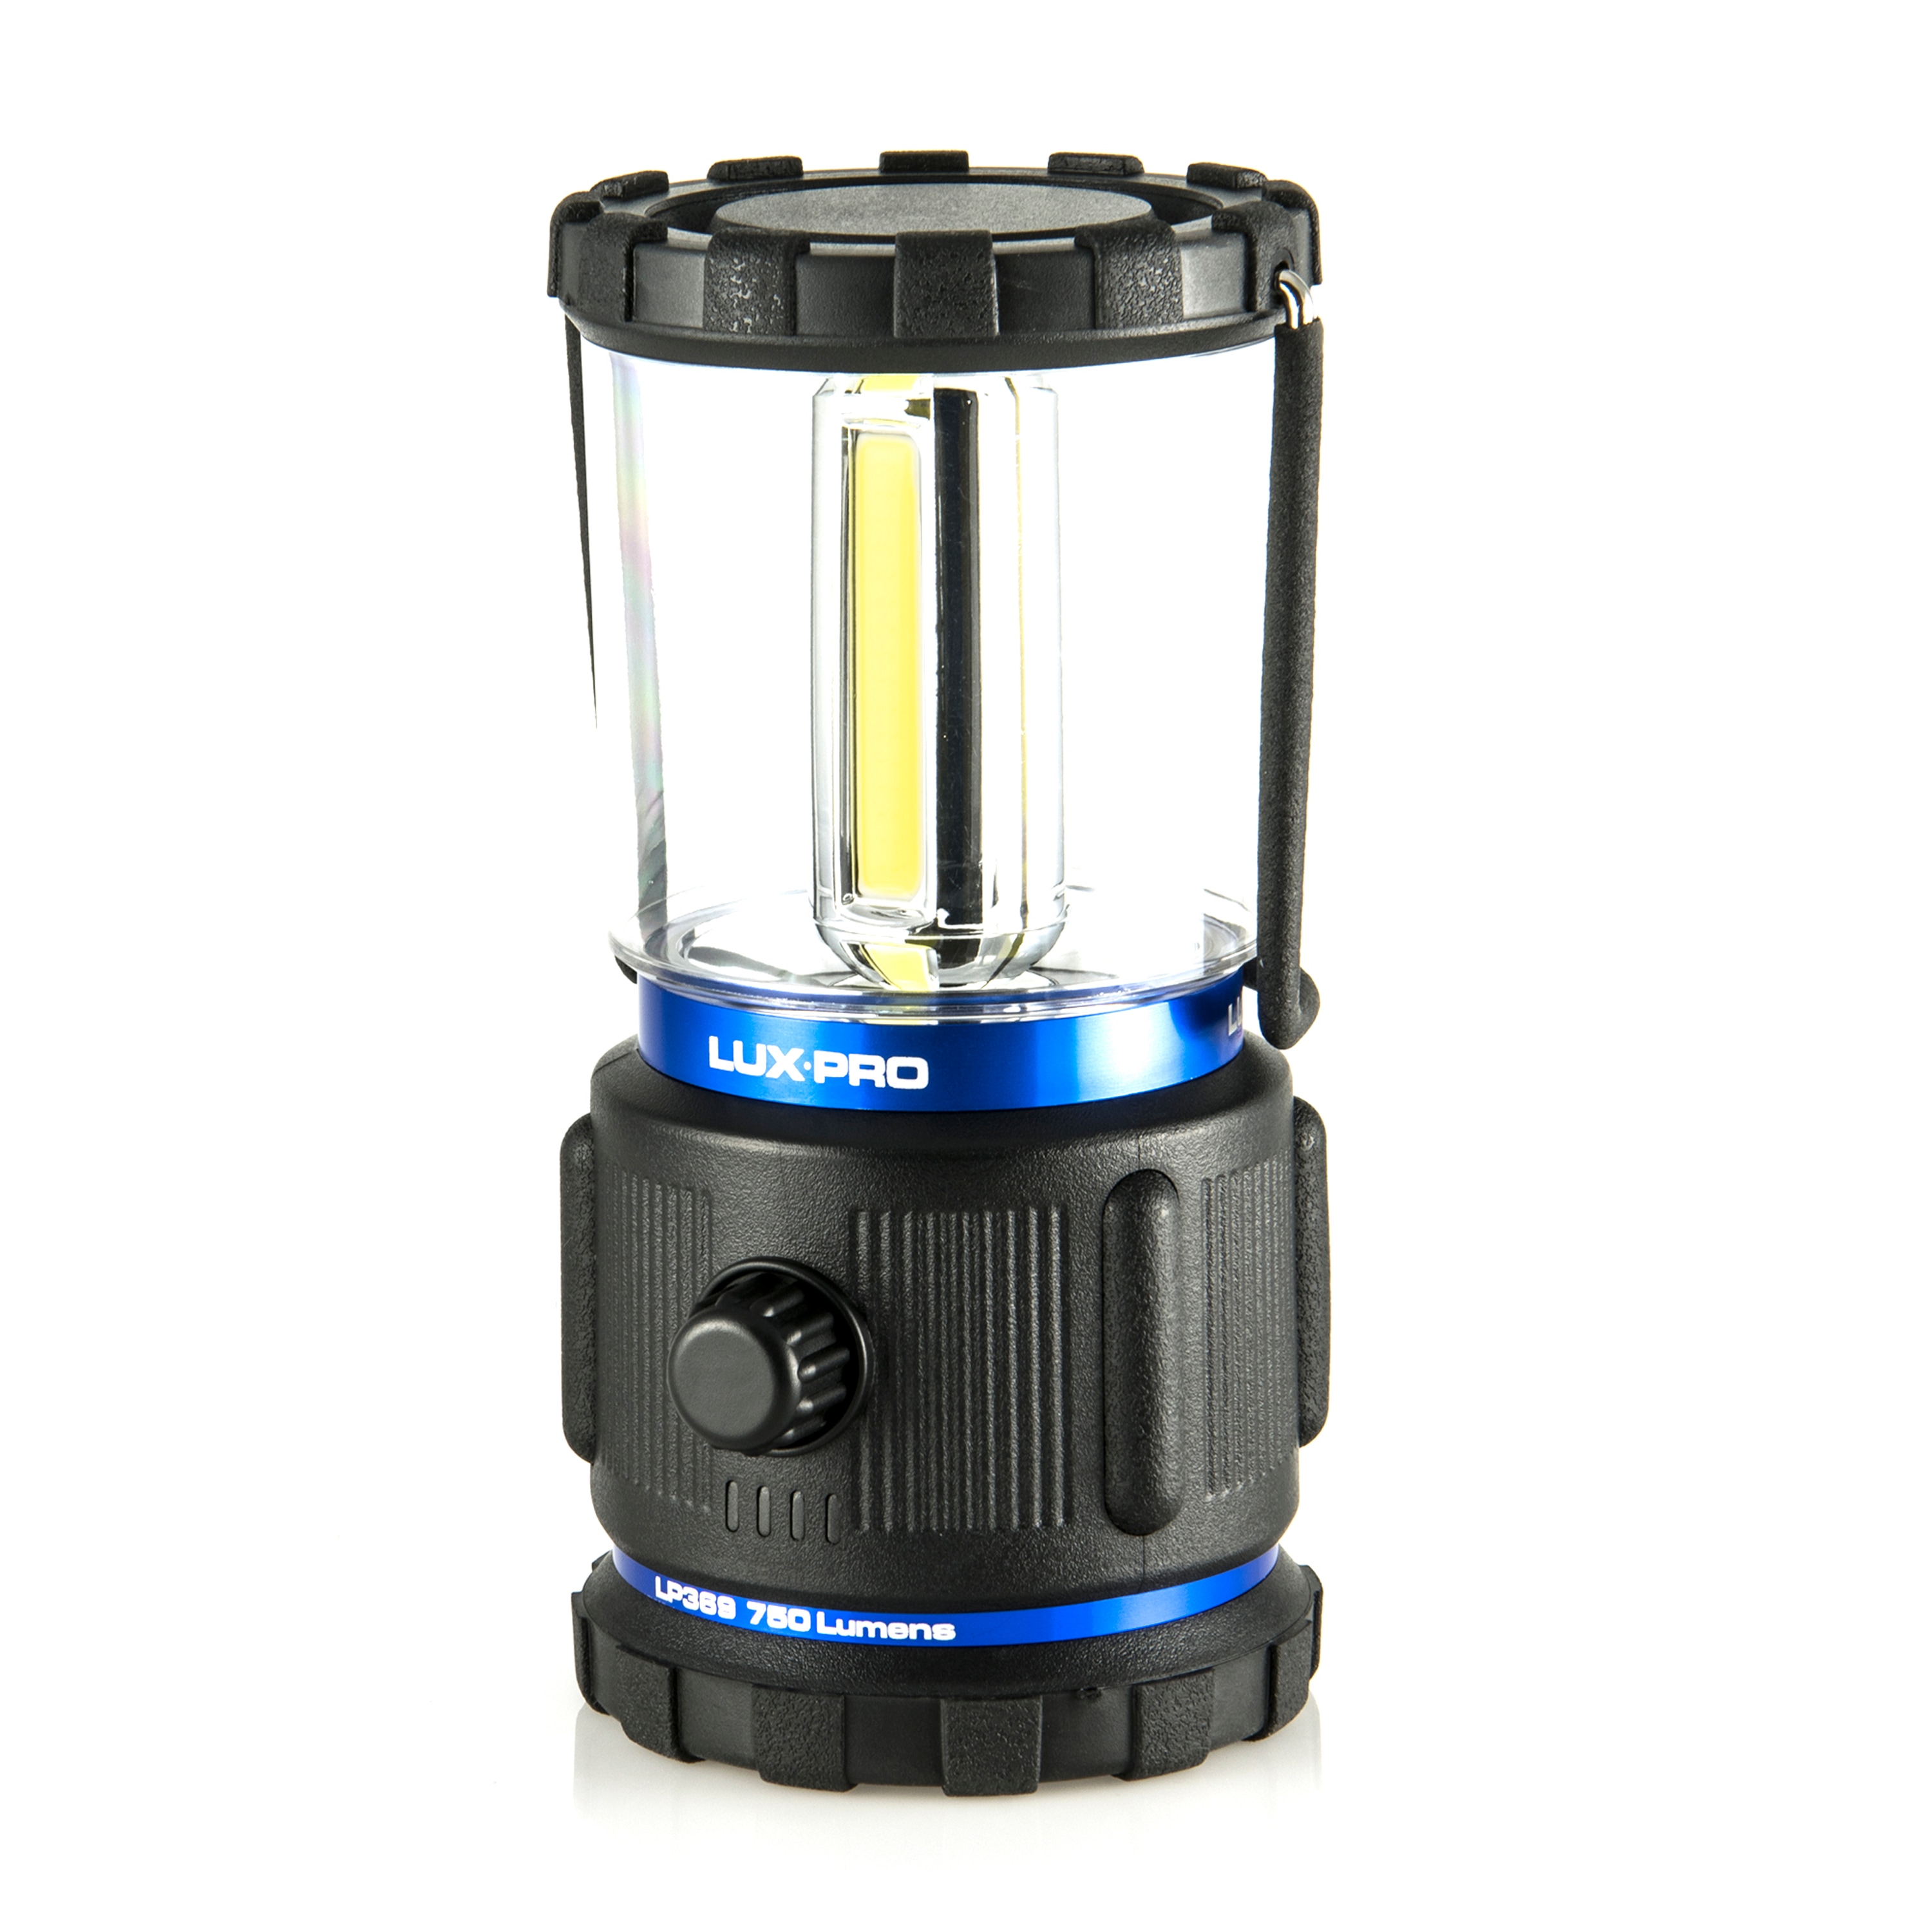 CAMMILE LED Camping Lantern Rechargeable, Battery Powered Lights